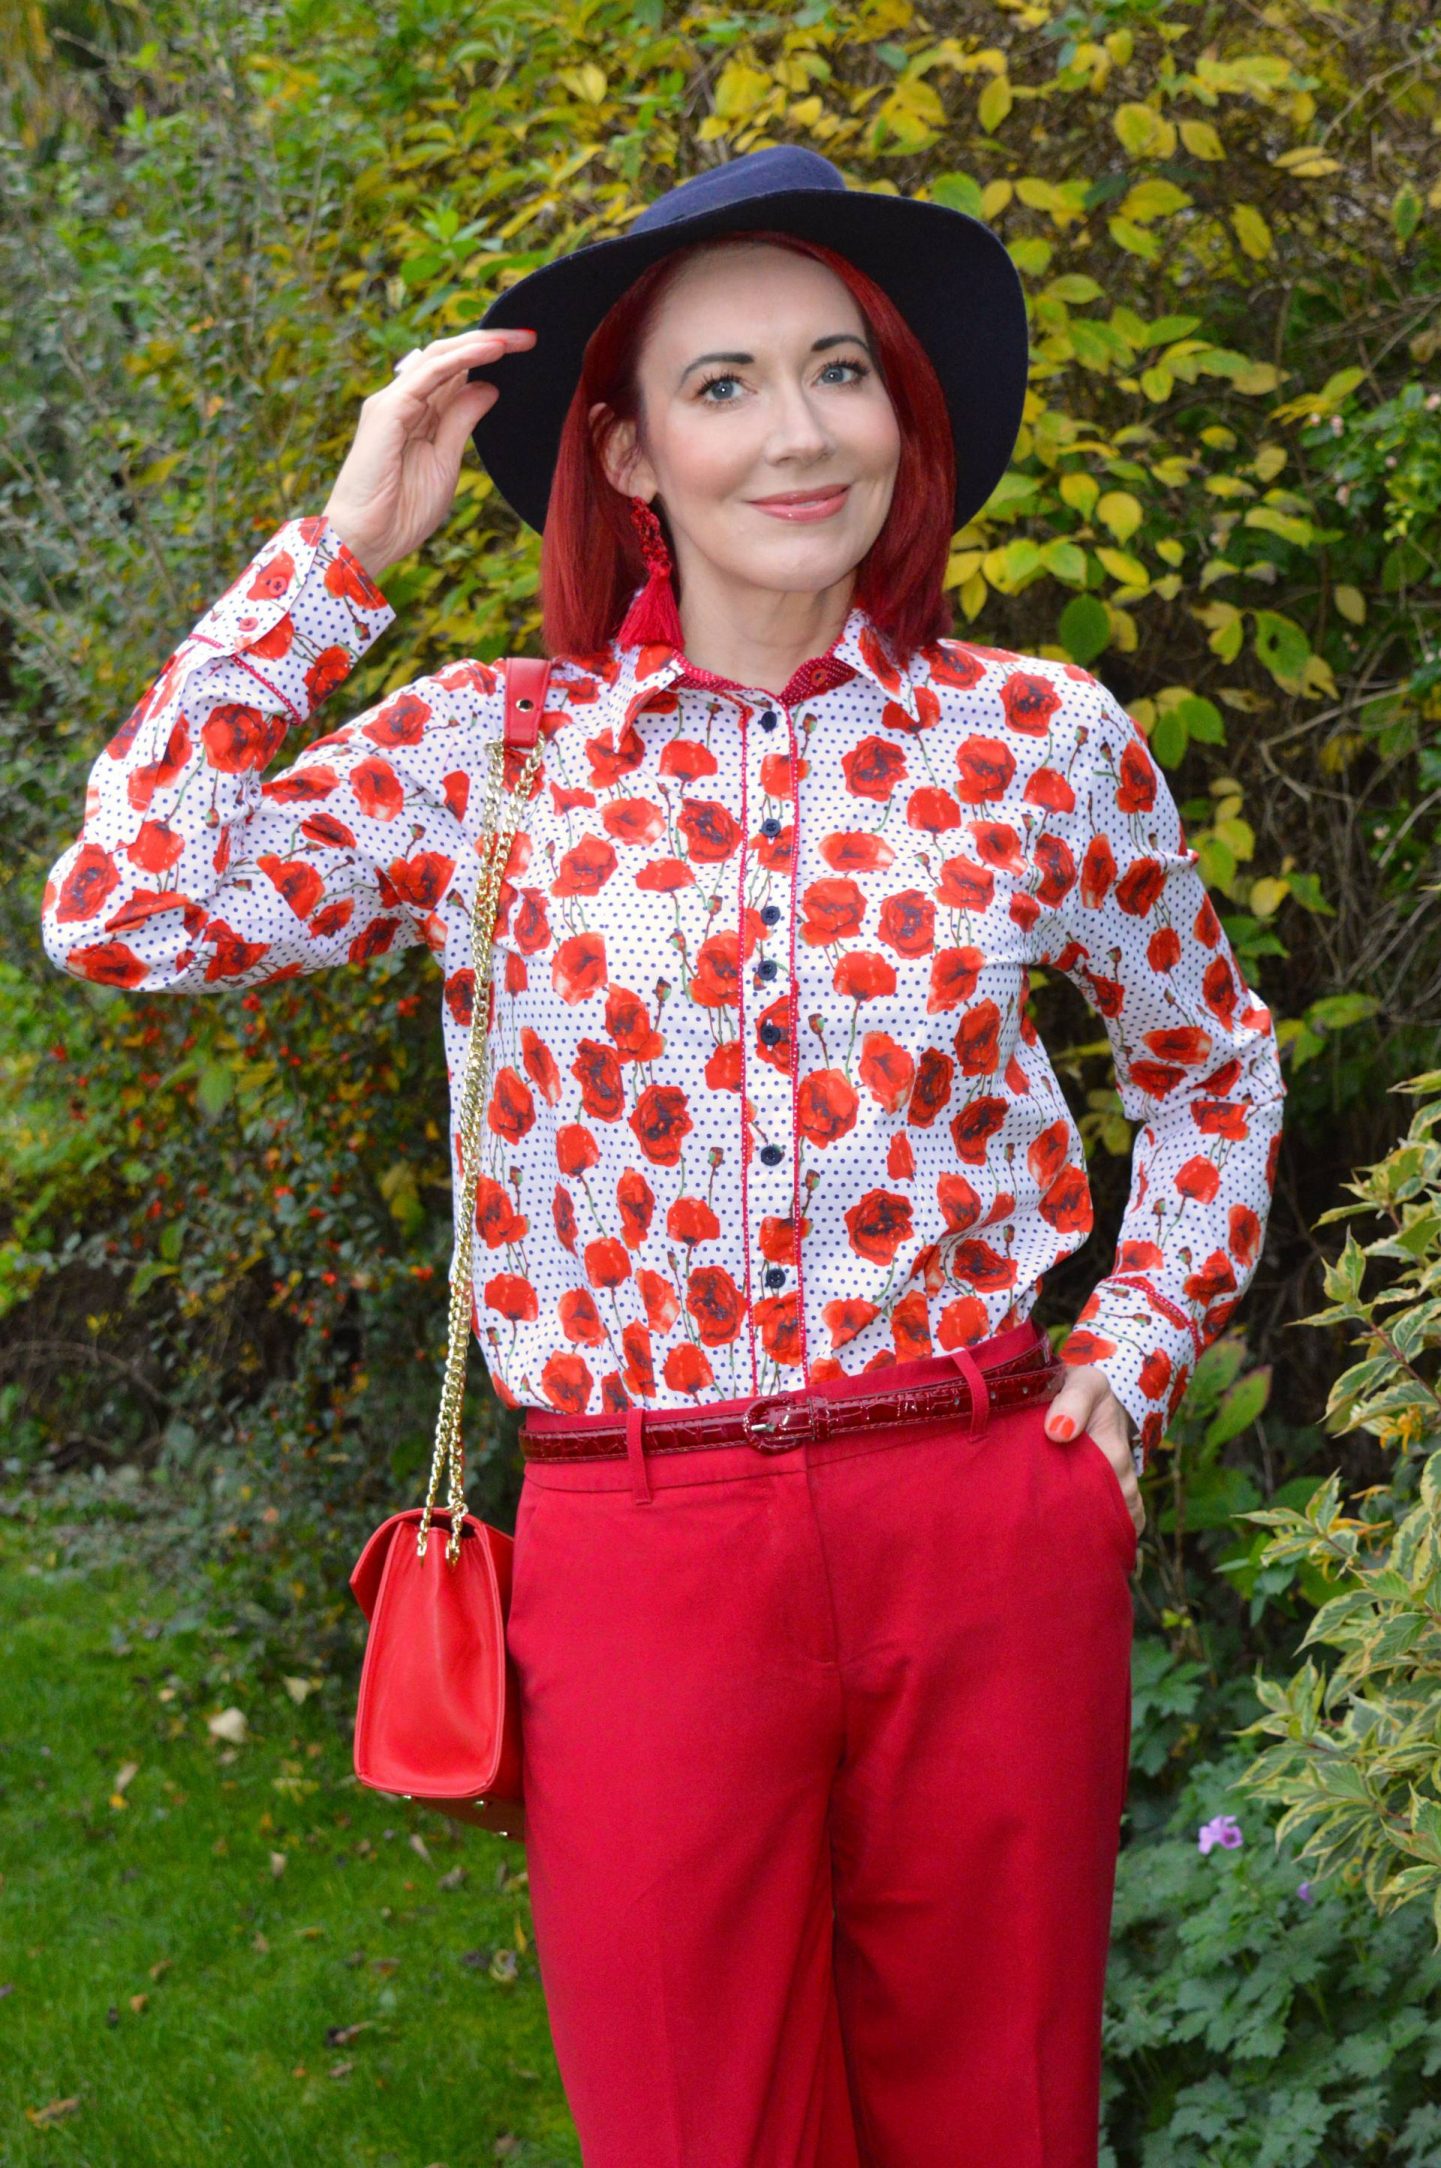 Grenouille Poppy Print Shirt and Red Trousers, LaBante red Kensington bag